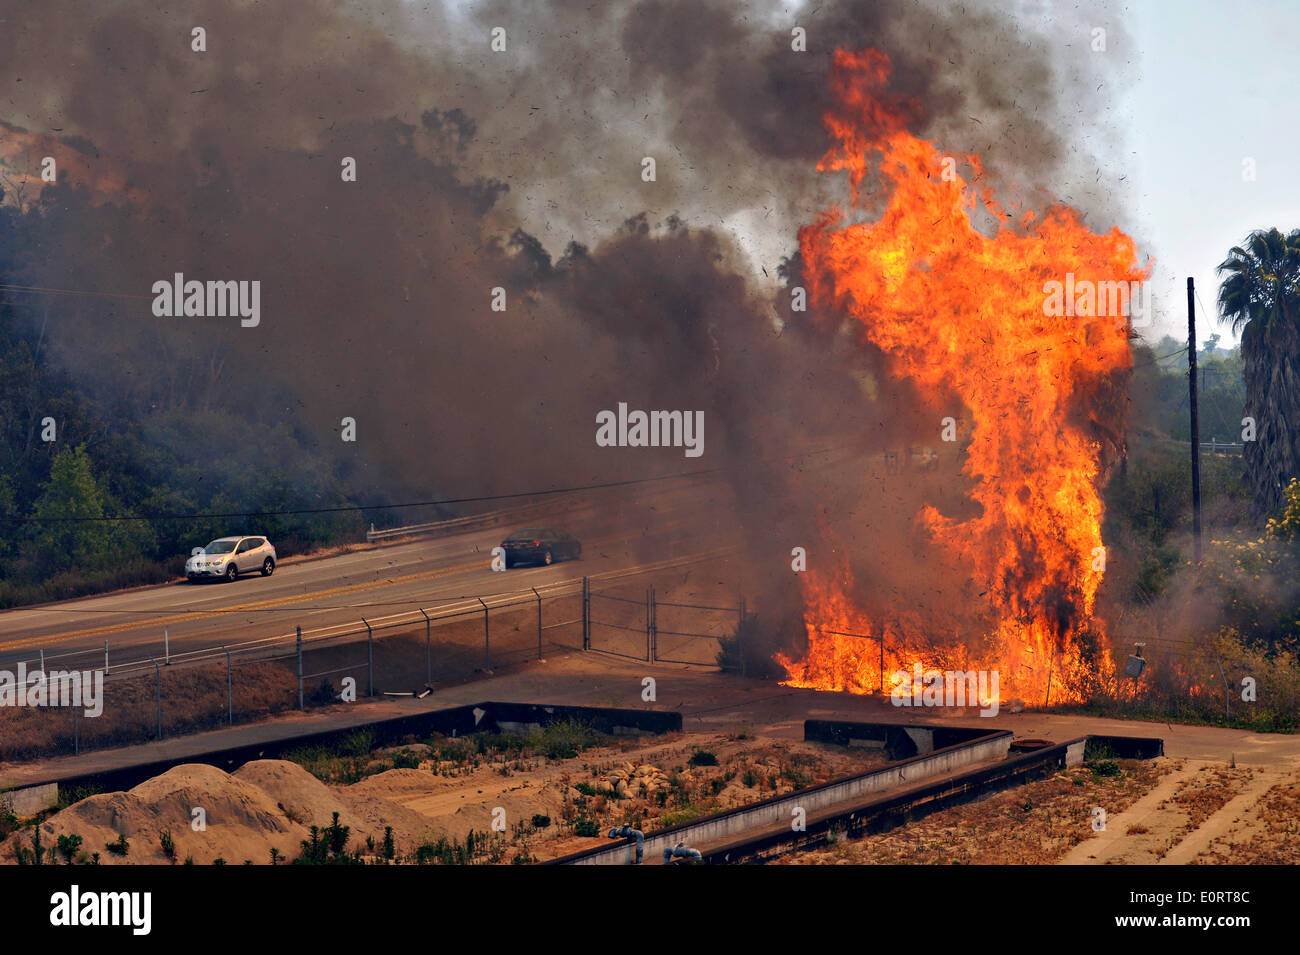 The Las Pulgas wildfire burns along a roadway in the foothills around the Marine Corps Air Station May 16, 2014 in Camp Pendleton, California.  The Las Pulgas Wildfire on Camp Pendleton has burned more than 15,000 acres and is the largest fire in San Diego County history. Stock Photo